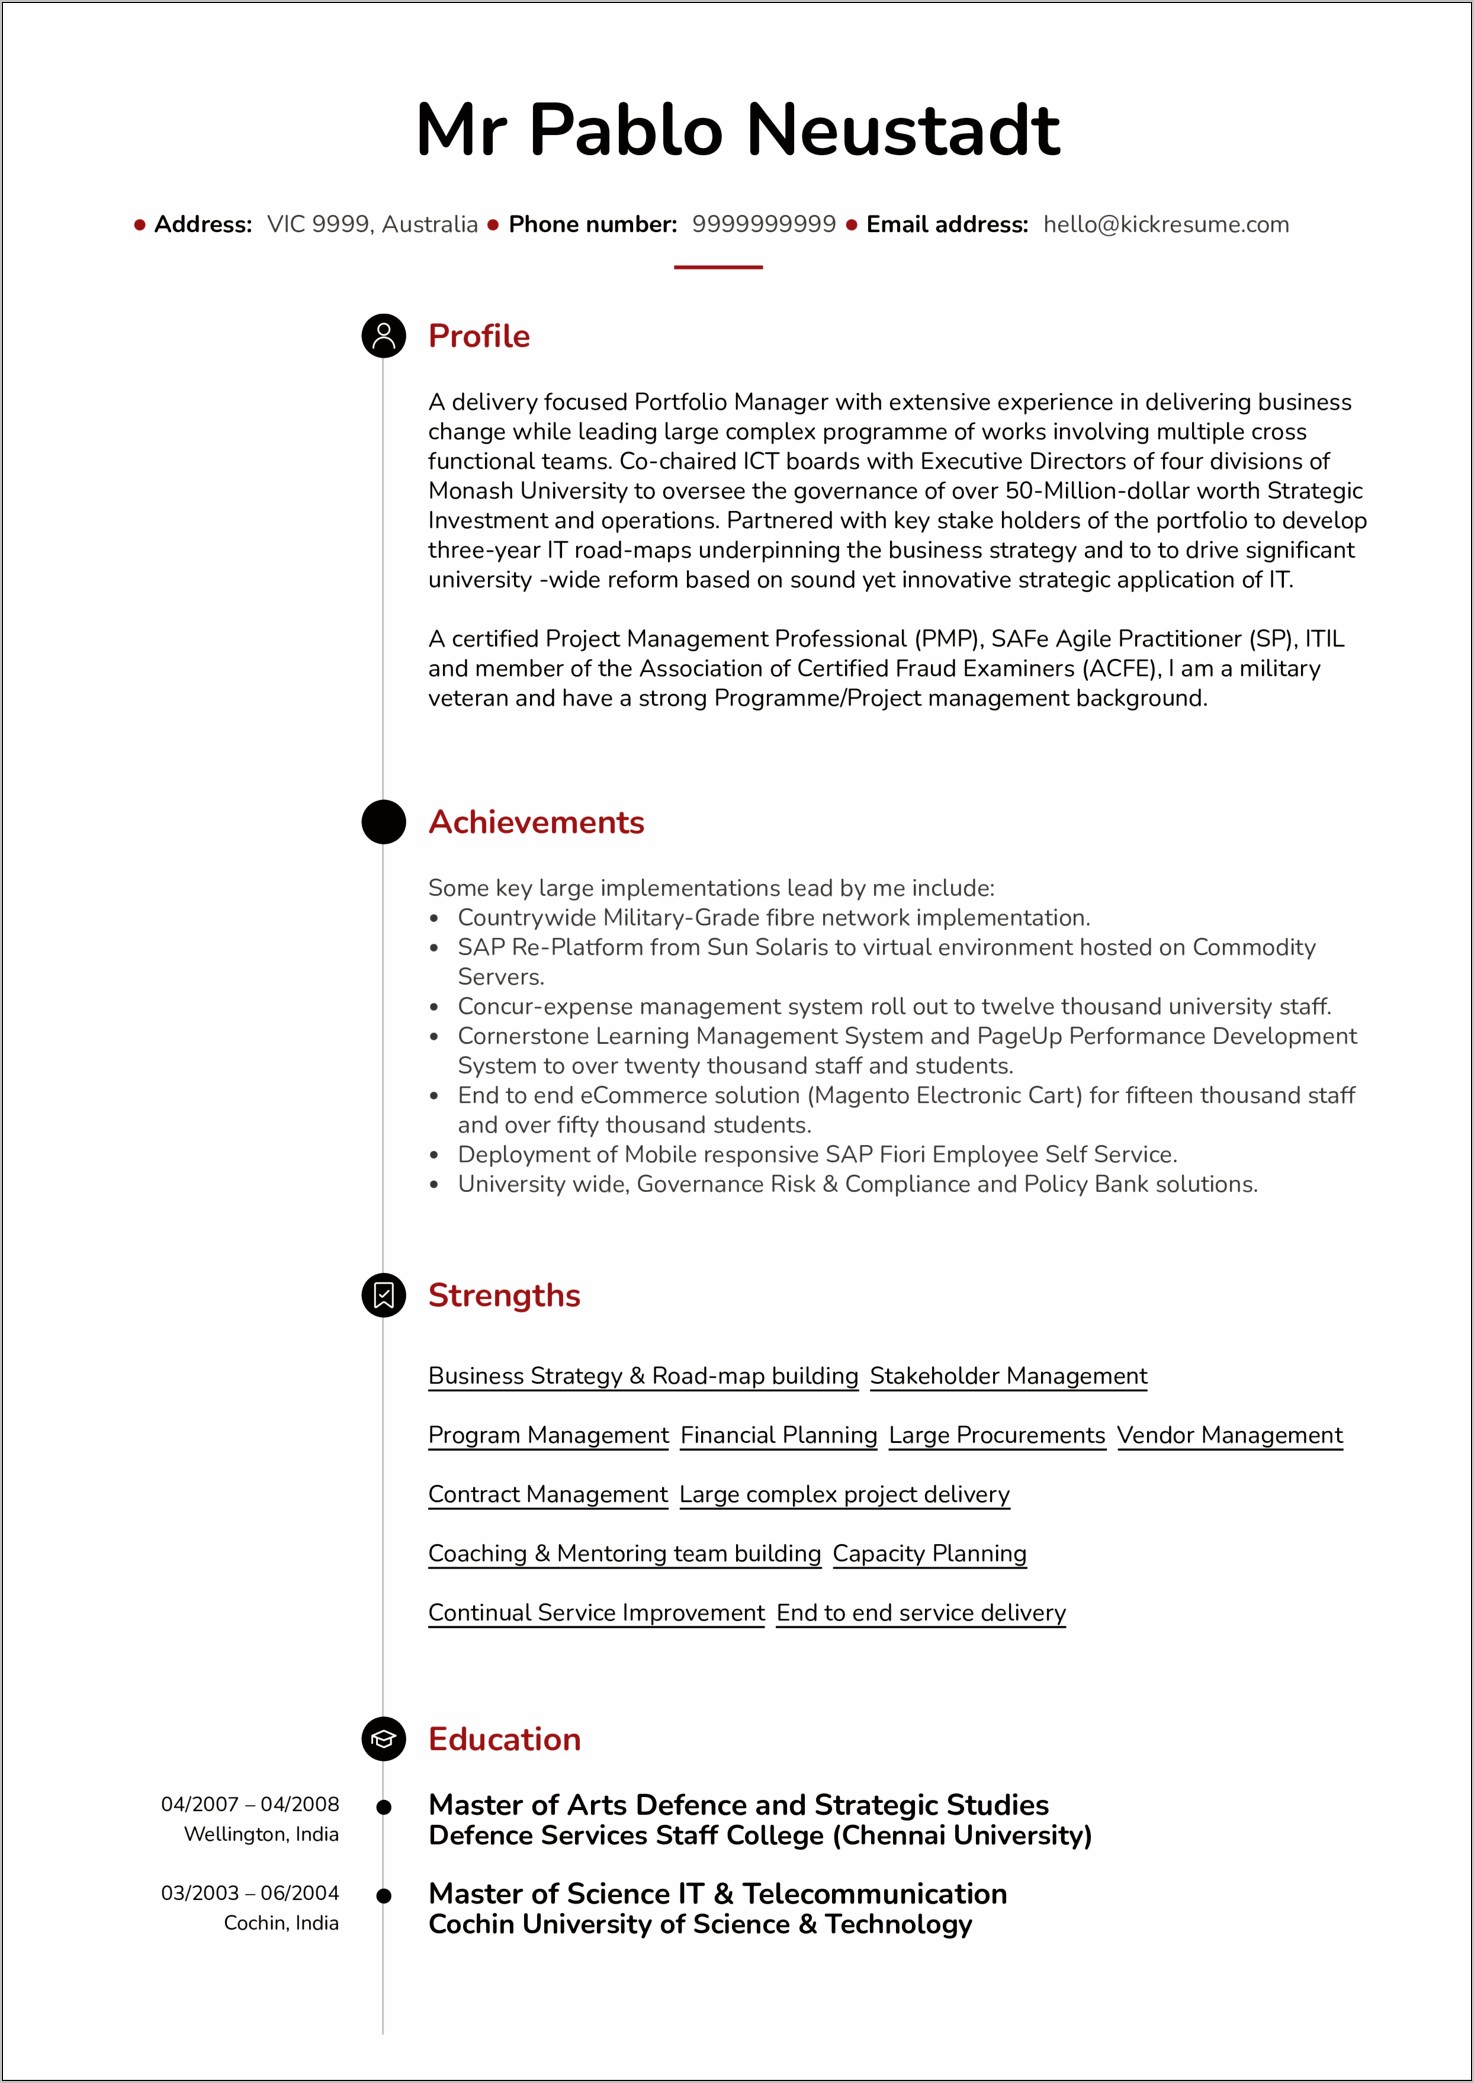 Resume Template Technical Project Manager